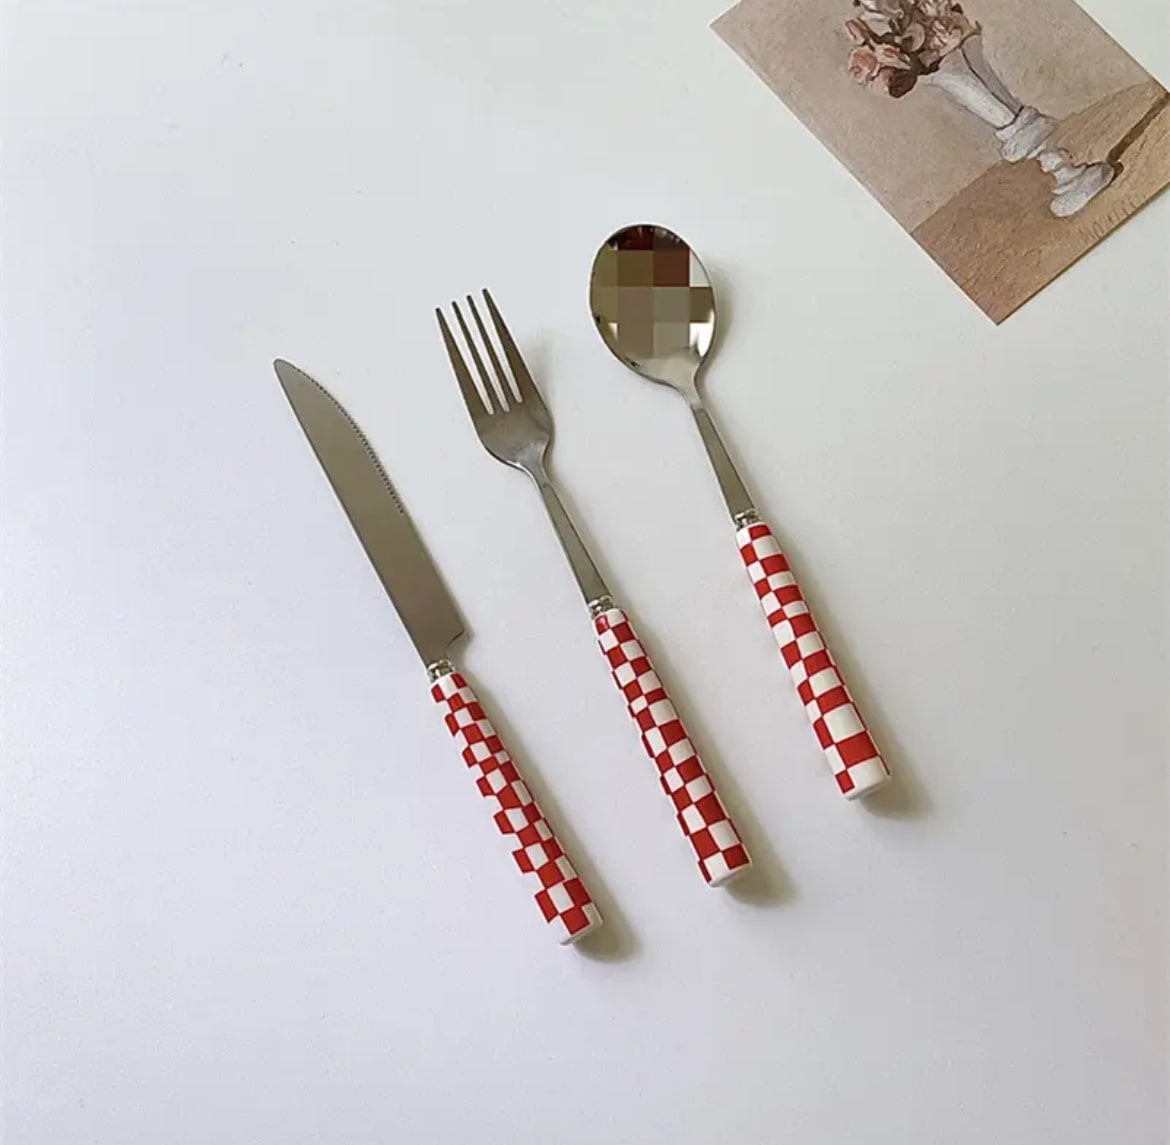 Vintage Checkerboard Design Spoon - Available at The Feelz Store